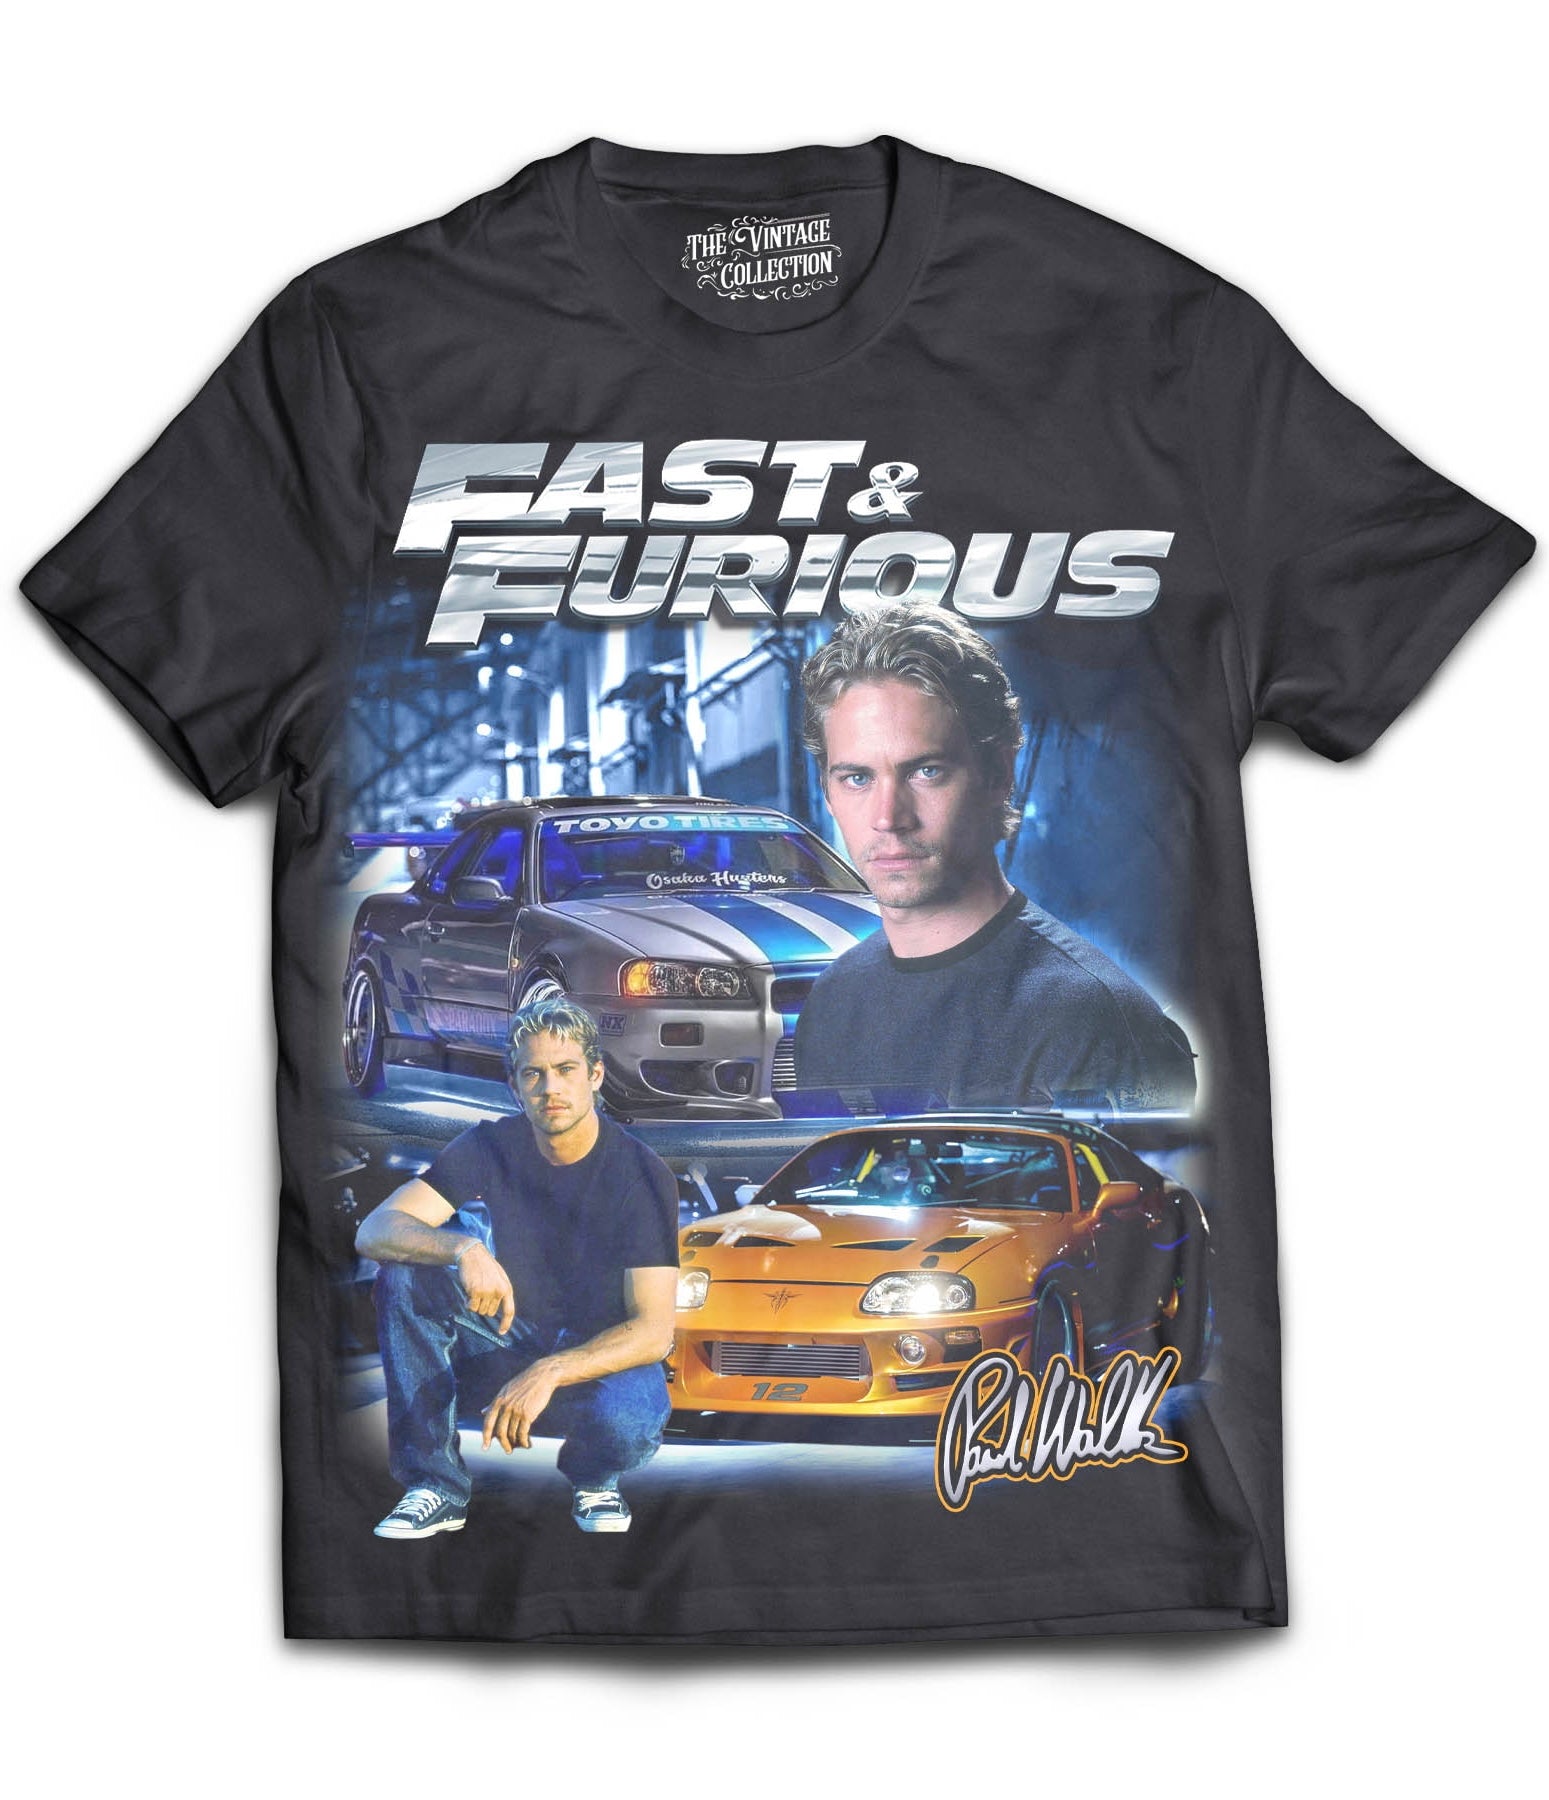 Fast & Furious Tribute Shirt (Black) – The Retro Collection